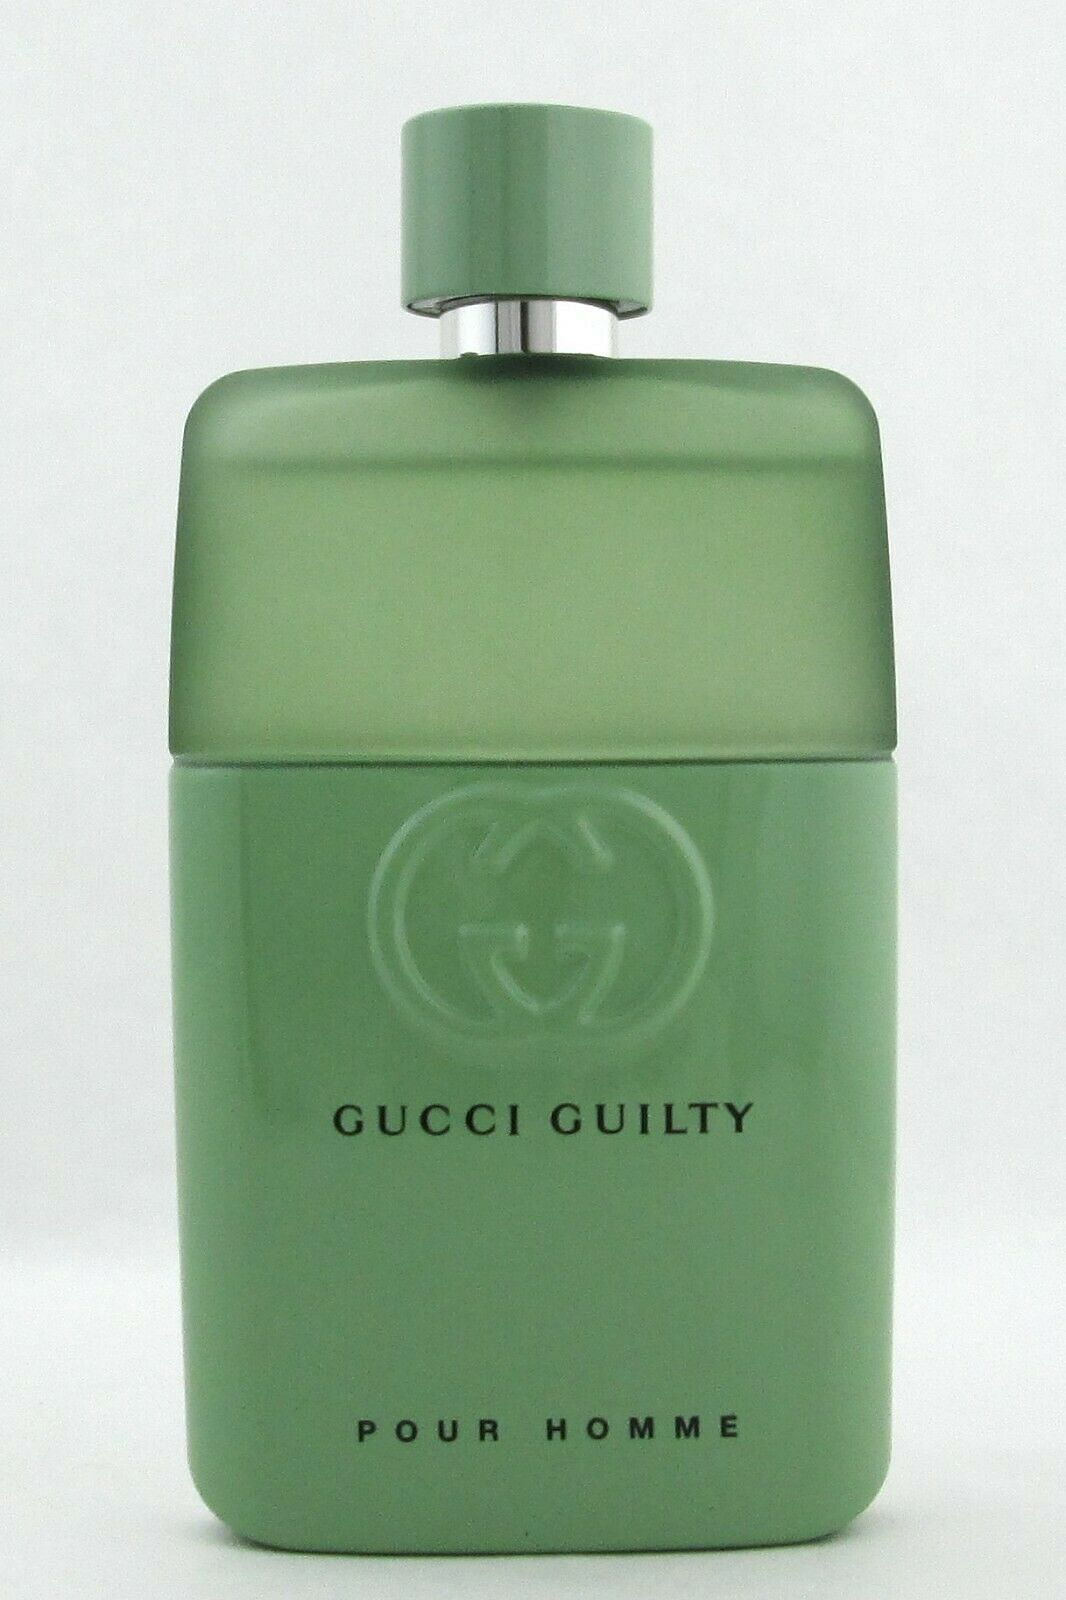 GUCCI GUILTY LOVE EDITION (M) EDT 90ML TESTER